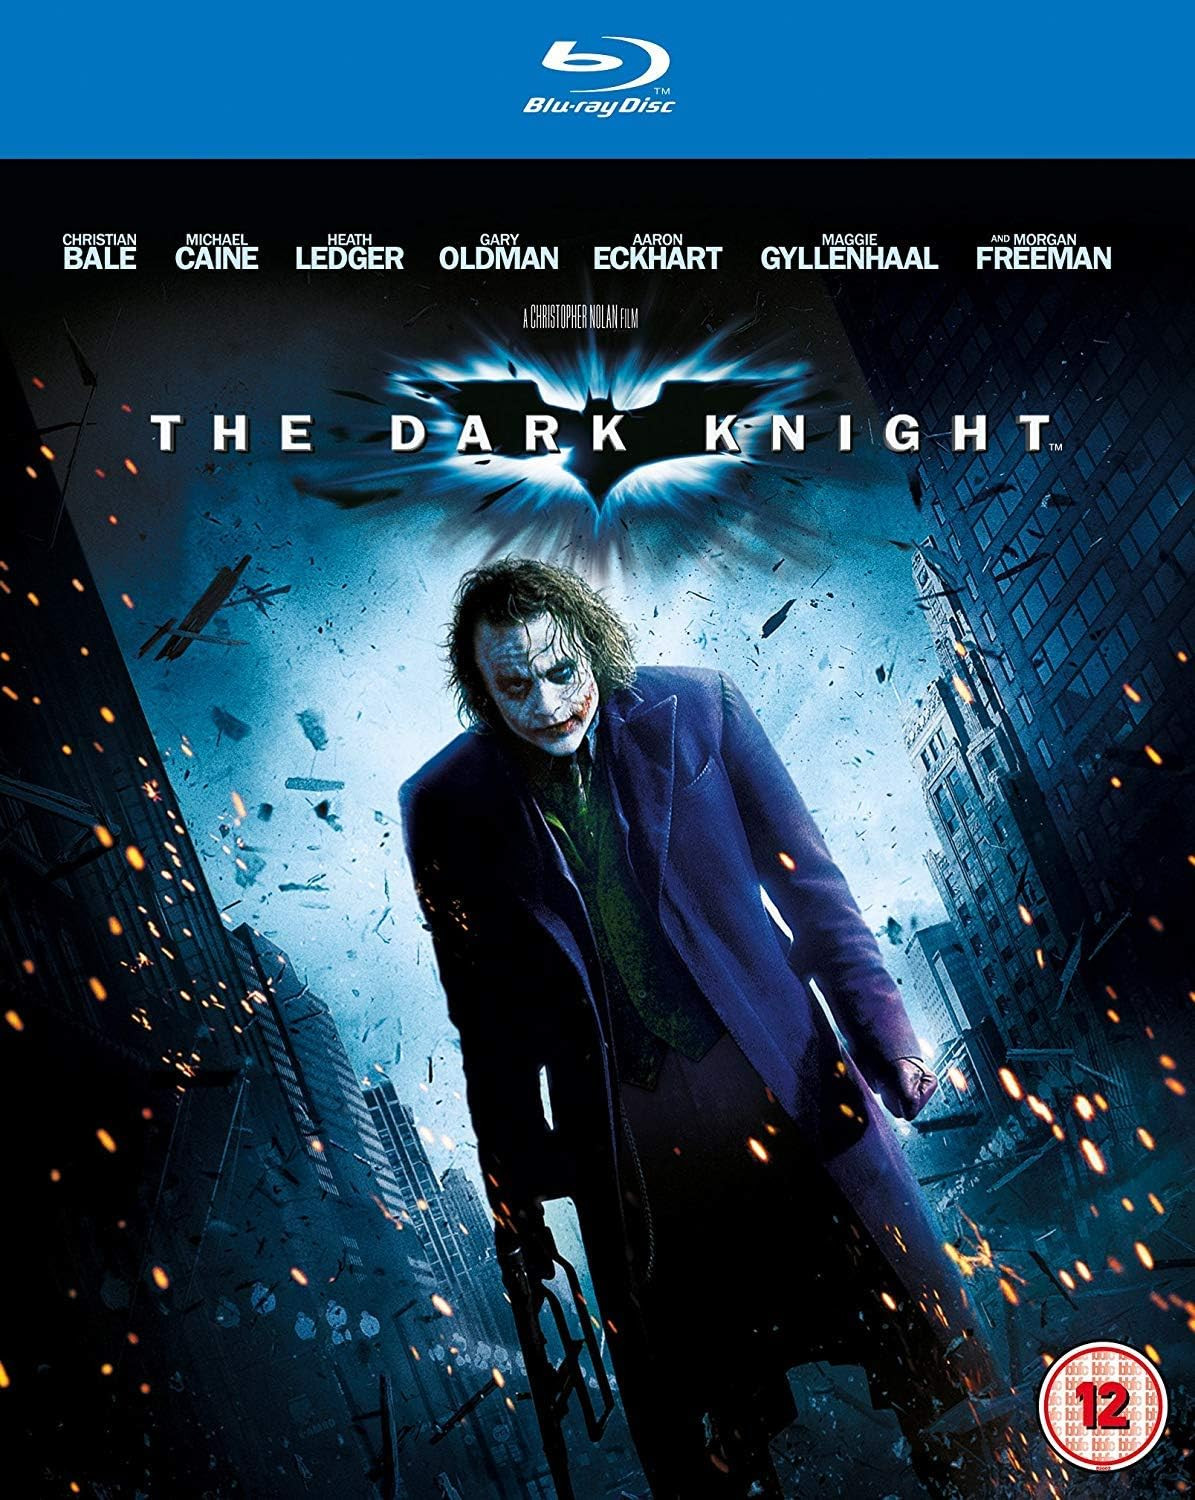 The Dark Knight (2-disc special edition)